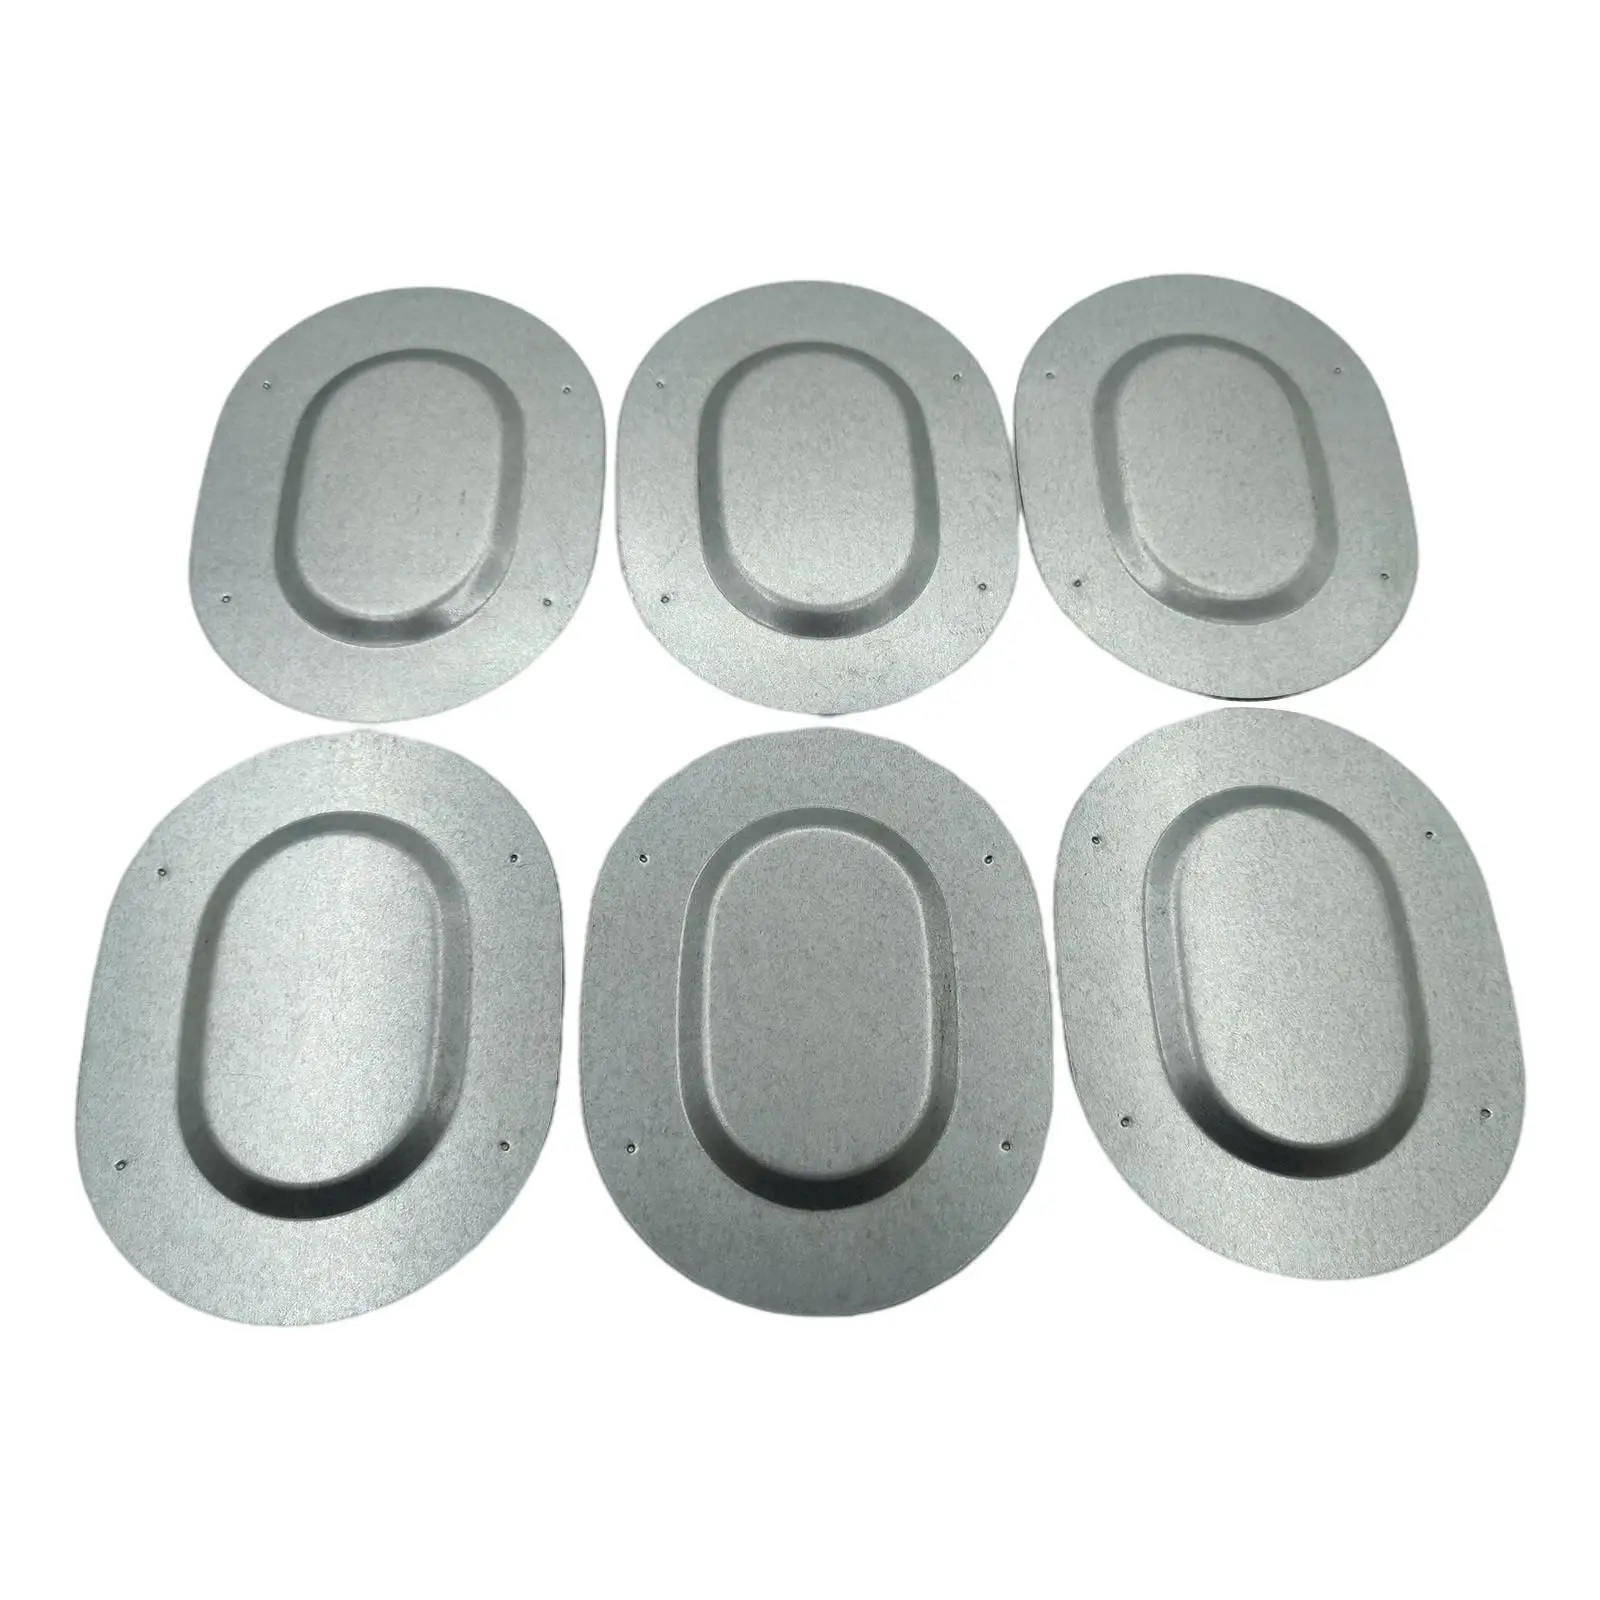 6x Trunk Floor Pan Drain Plugs Set from 67-77 Oval Drain Plug Engine Parts Body Galvanized Metal for  A-Body